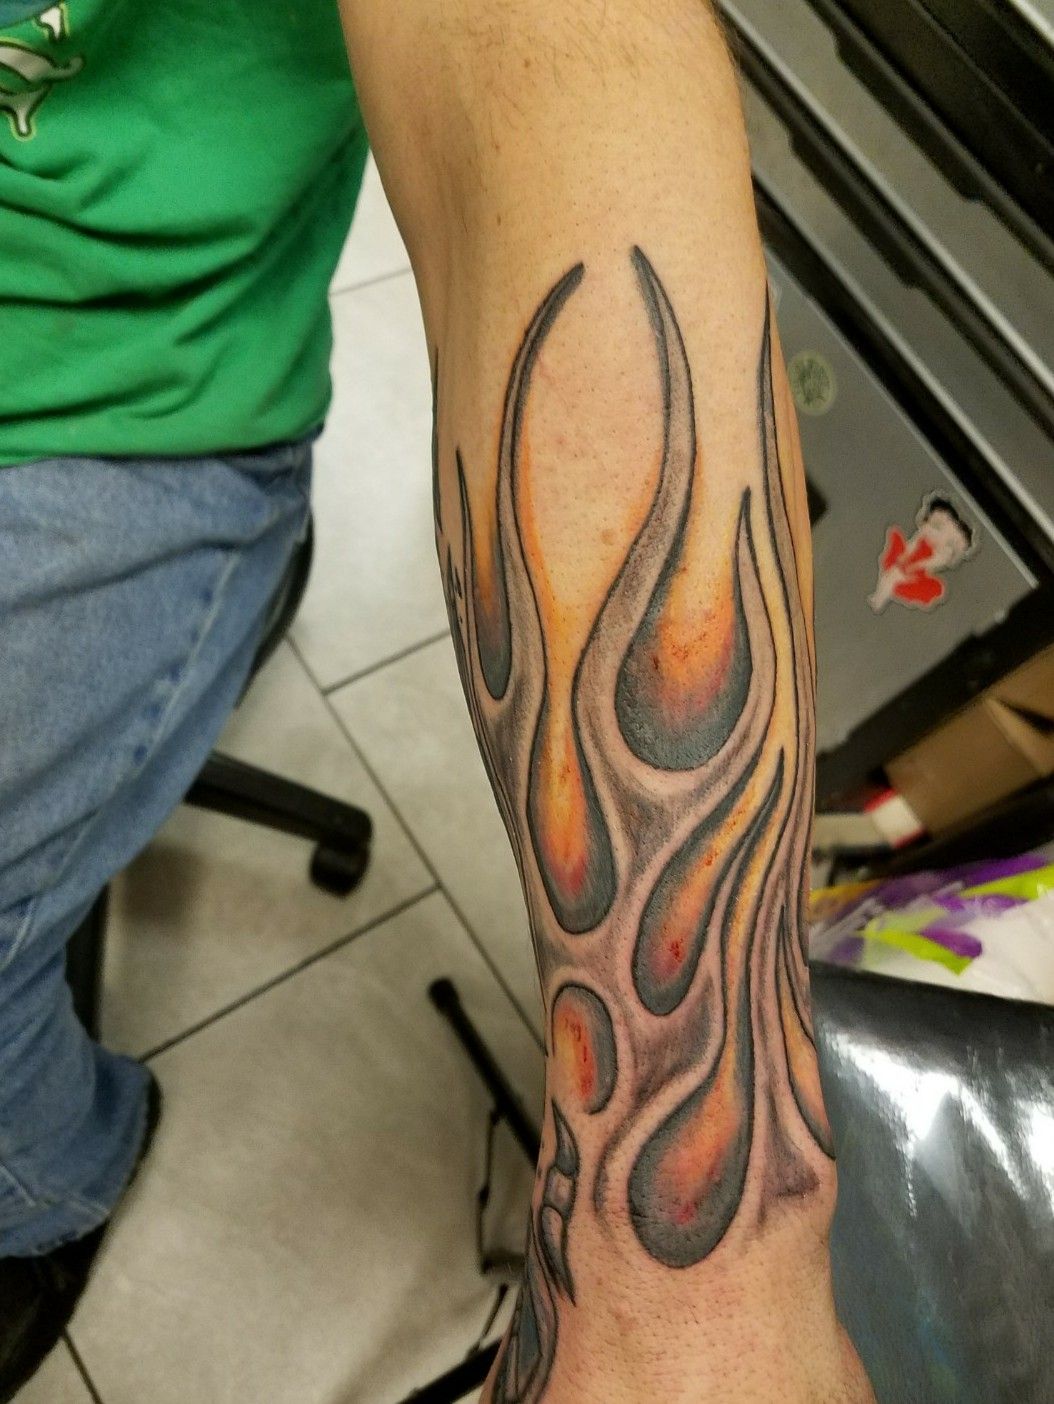 Skull with Flames on Guys Calf